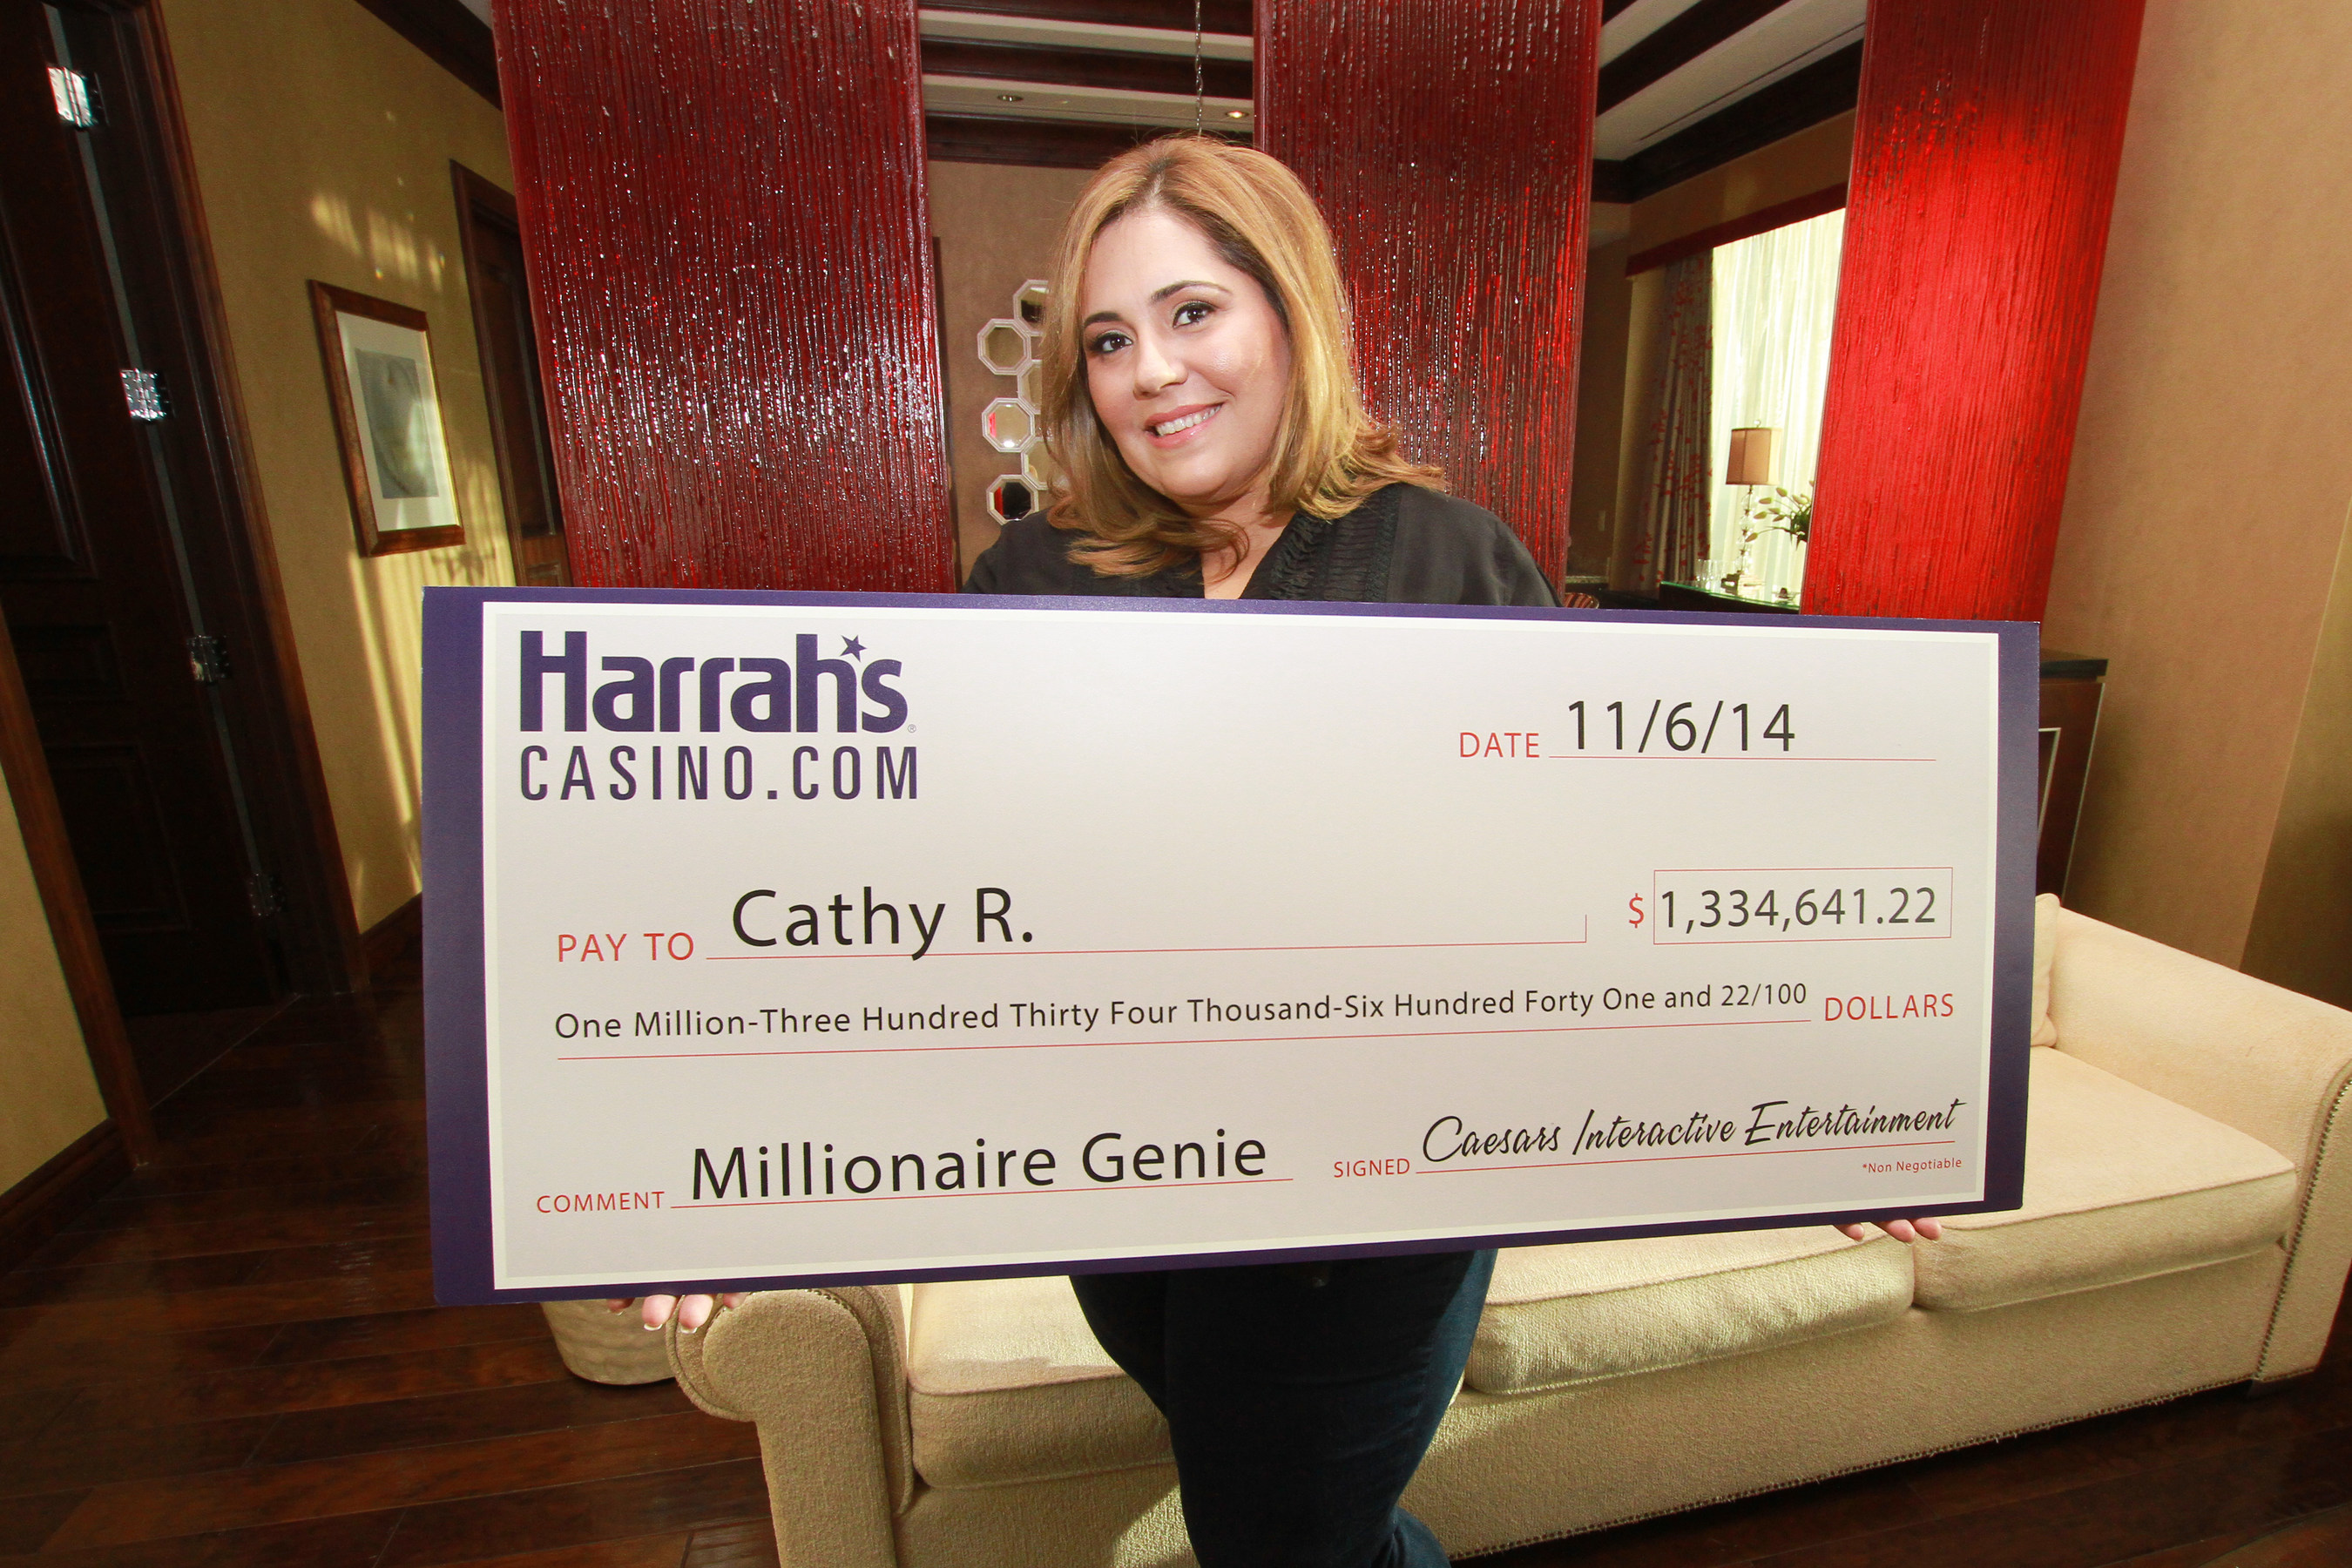 Cathy R. holds a ceremonial check at Harrah's Casino in Atlantic City after winning more than $1.3 million playing a HarrahsCasino.com slot game at her home on November 6.